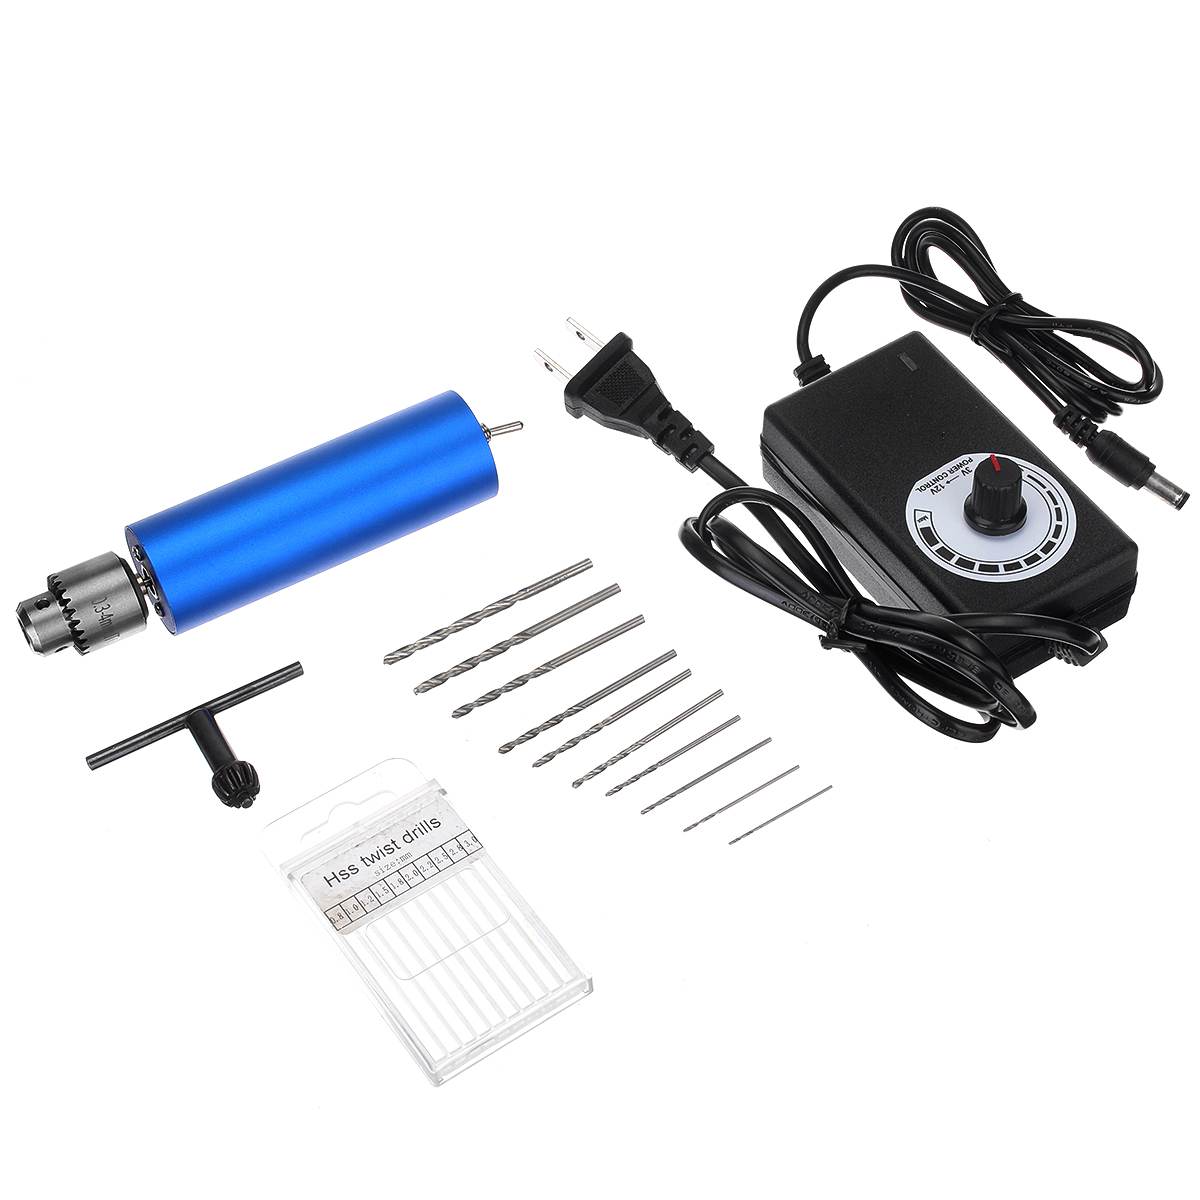 12000RPM mini USB Hand Drill Electric Hand Drills 12V-24V with DIY 385 Ball Bearing Motor JT0 Drill Chuck Small Electric Drills: With Accessories